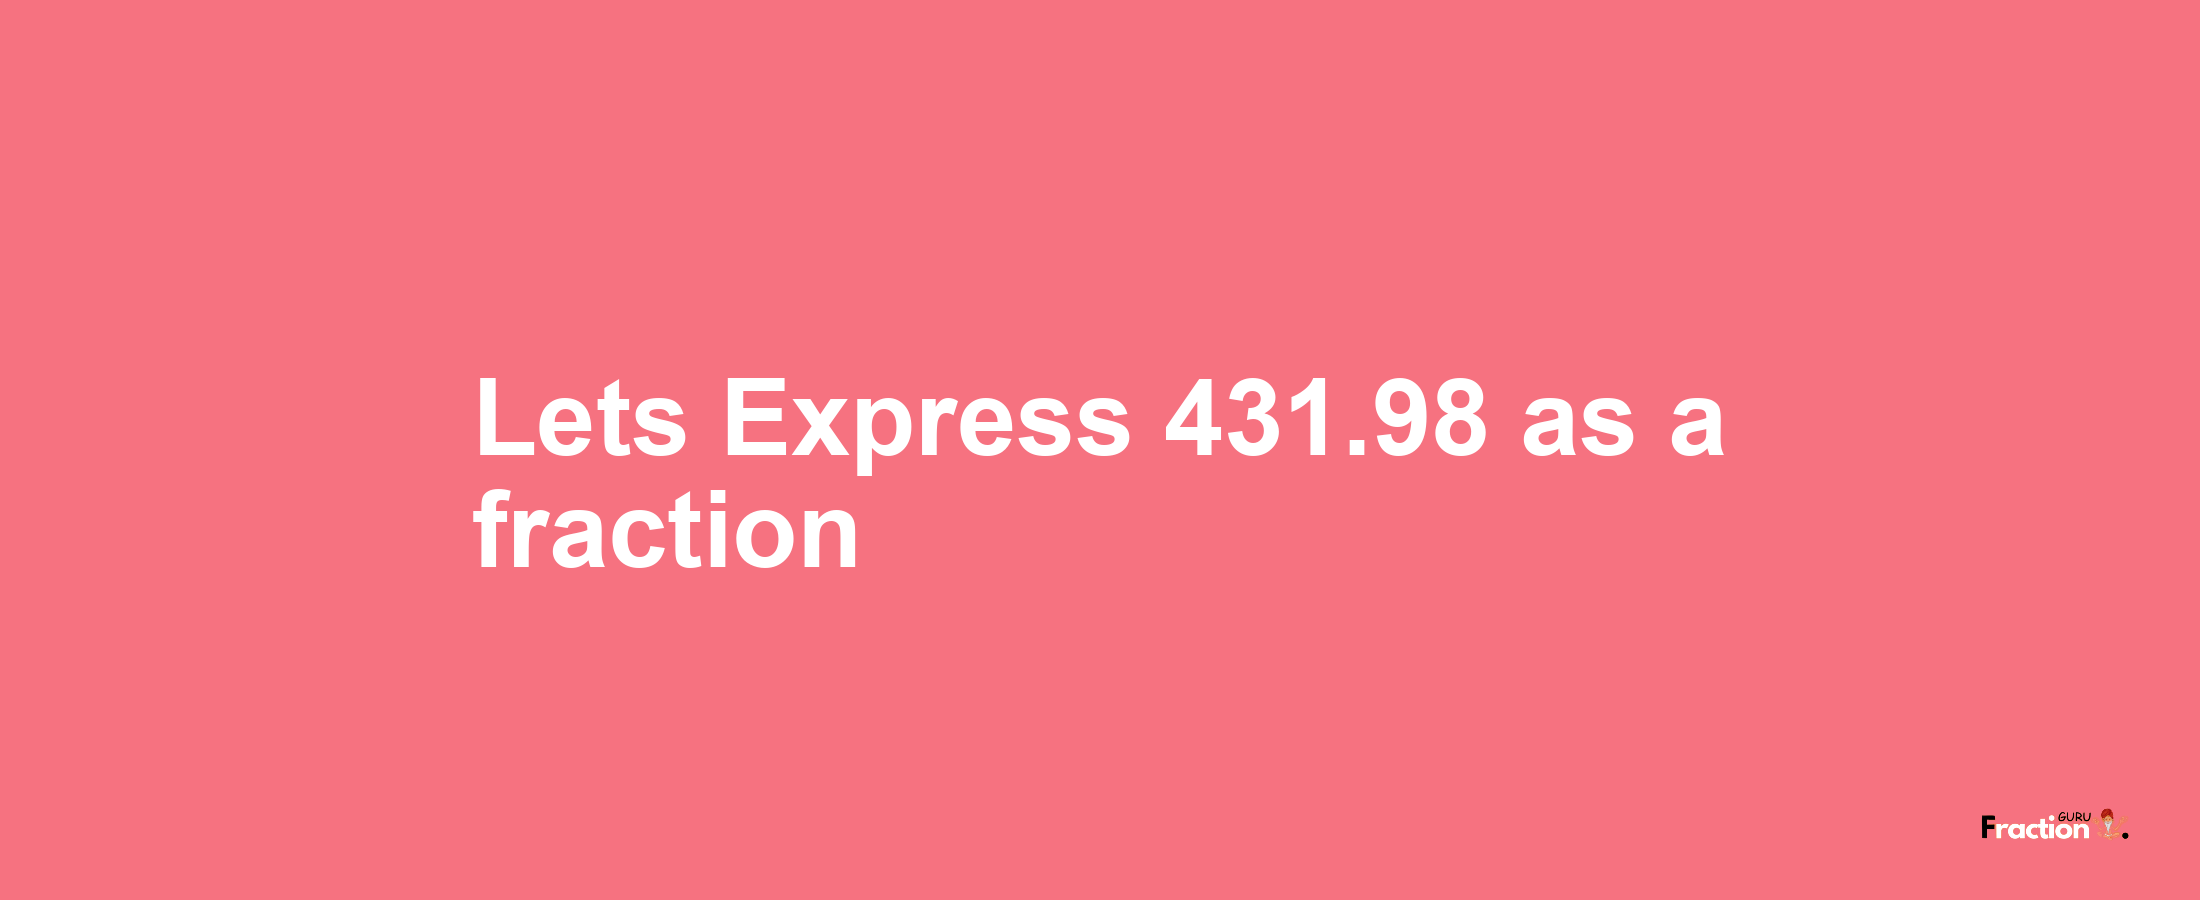 Lets Express 431.98 as afraction